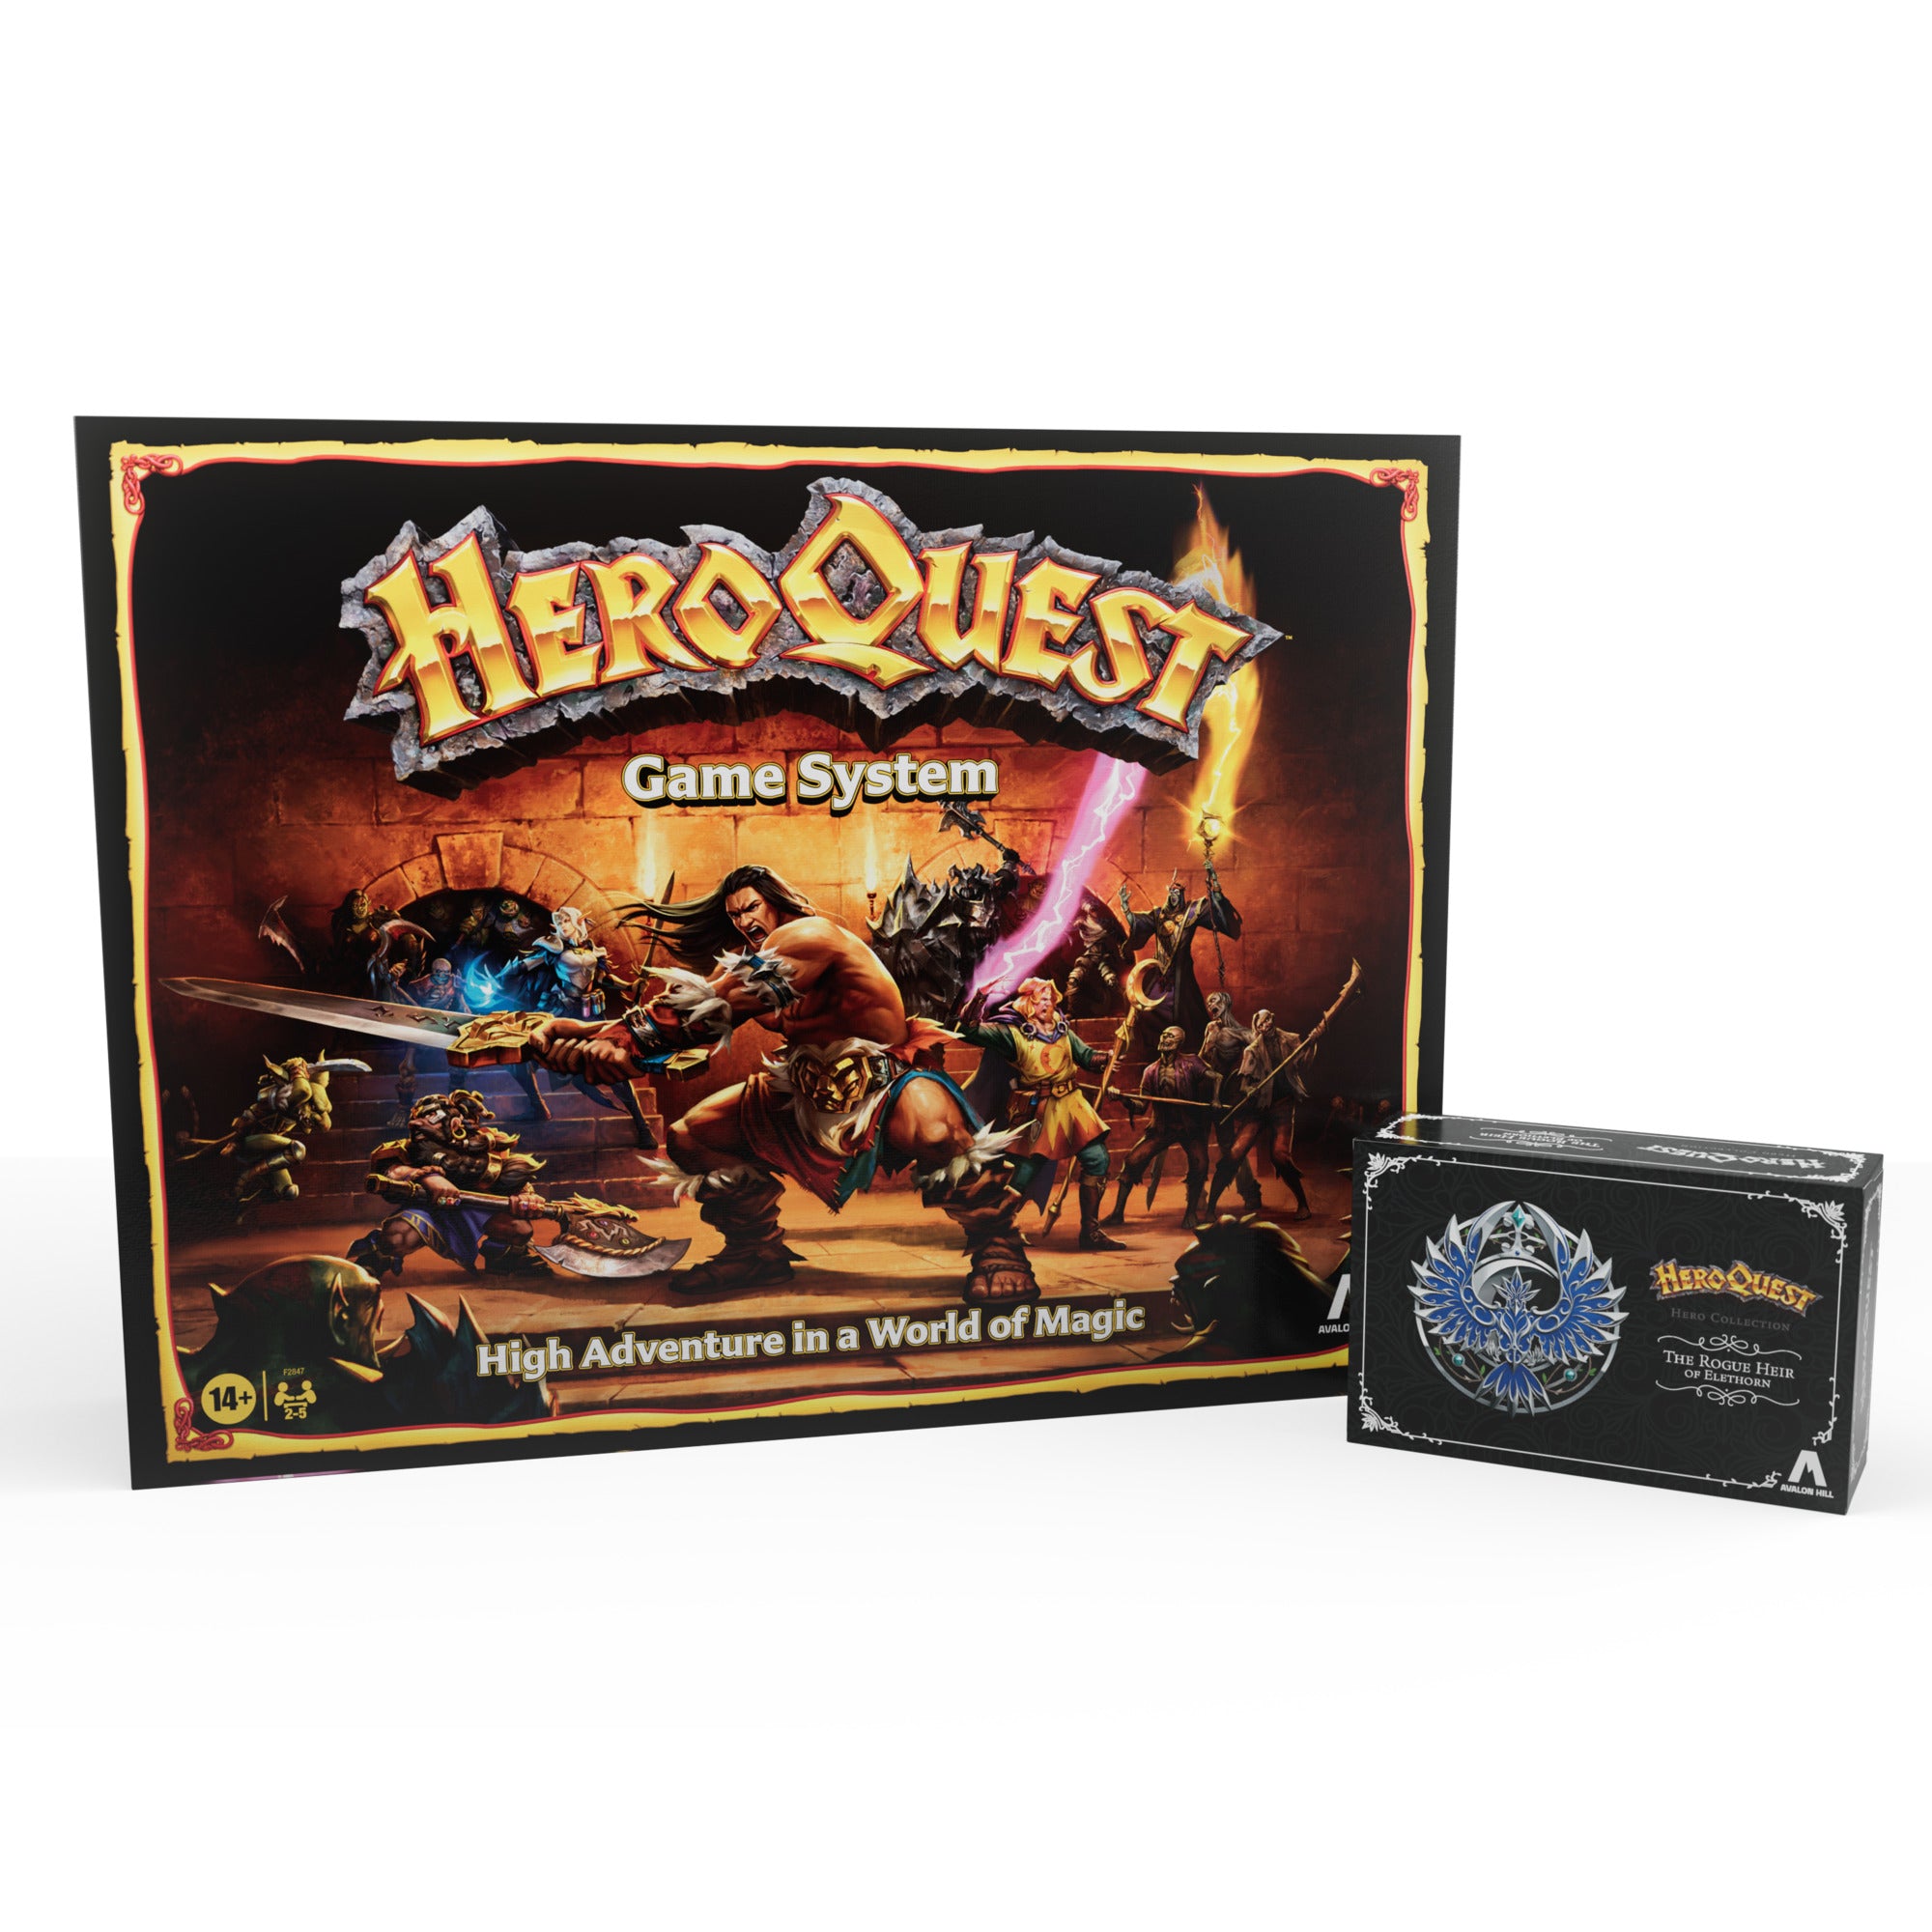 HeroQuest The Rogue Heir of Elethorn